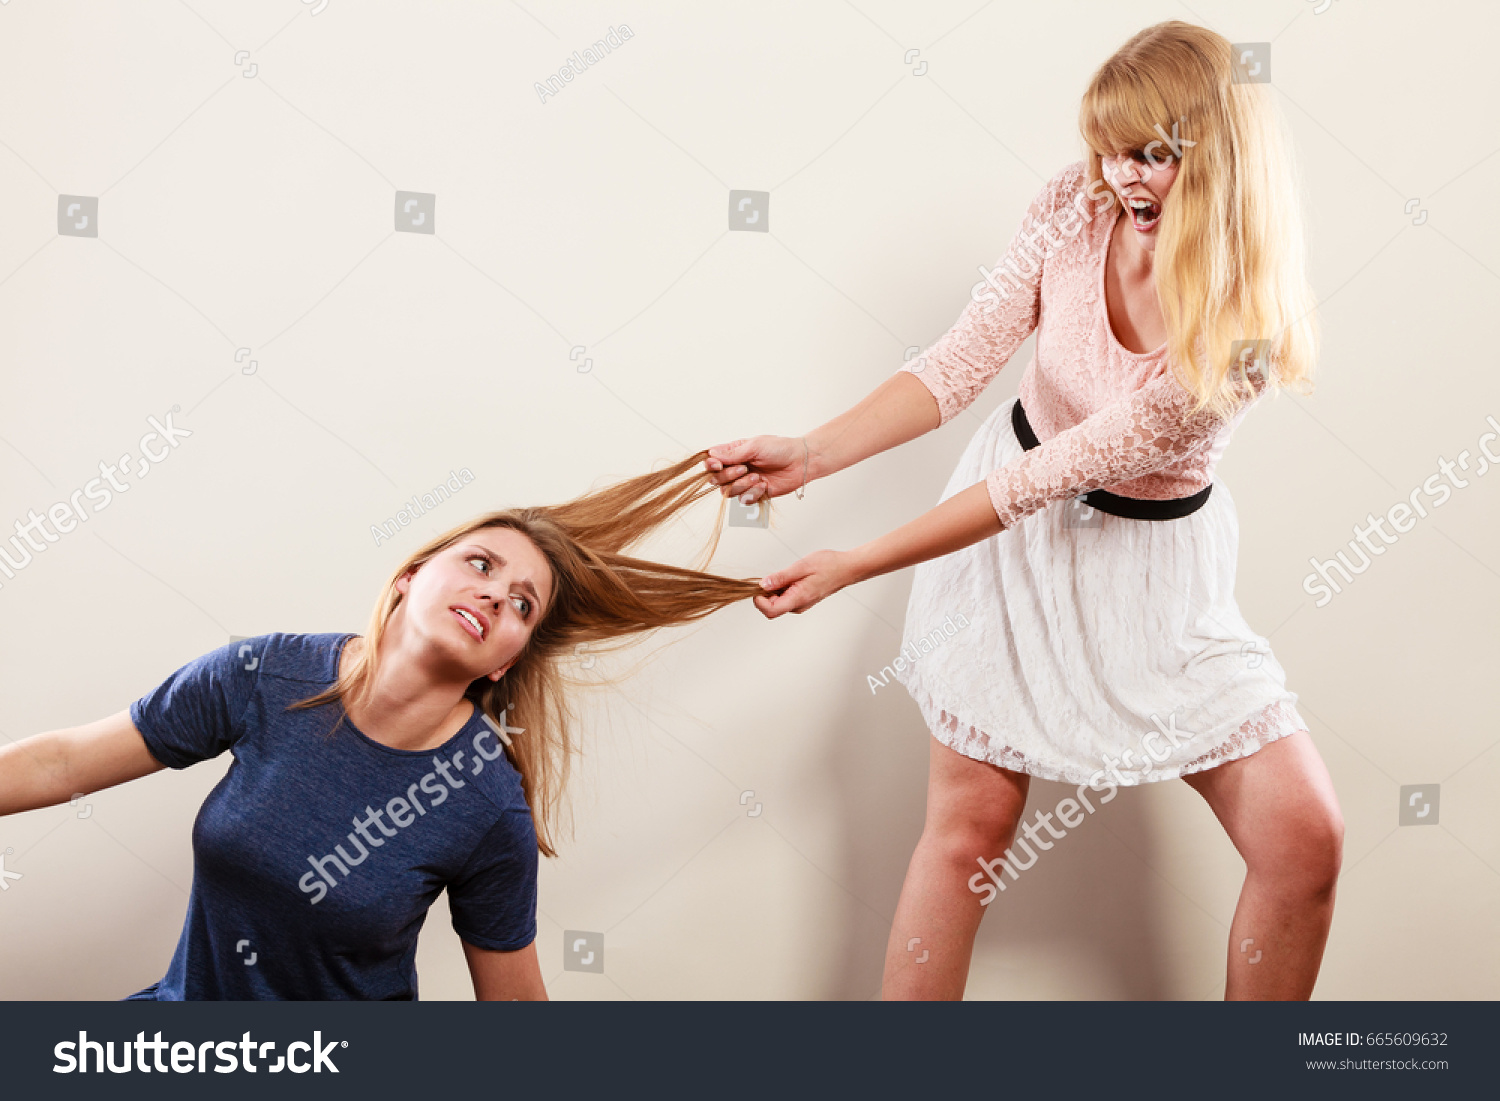 Mother Daughter Catfights